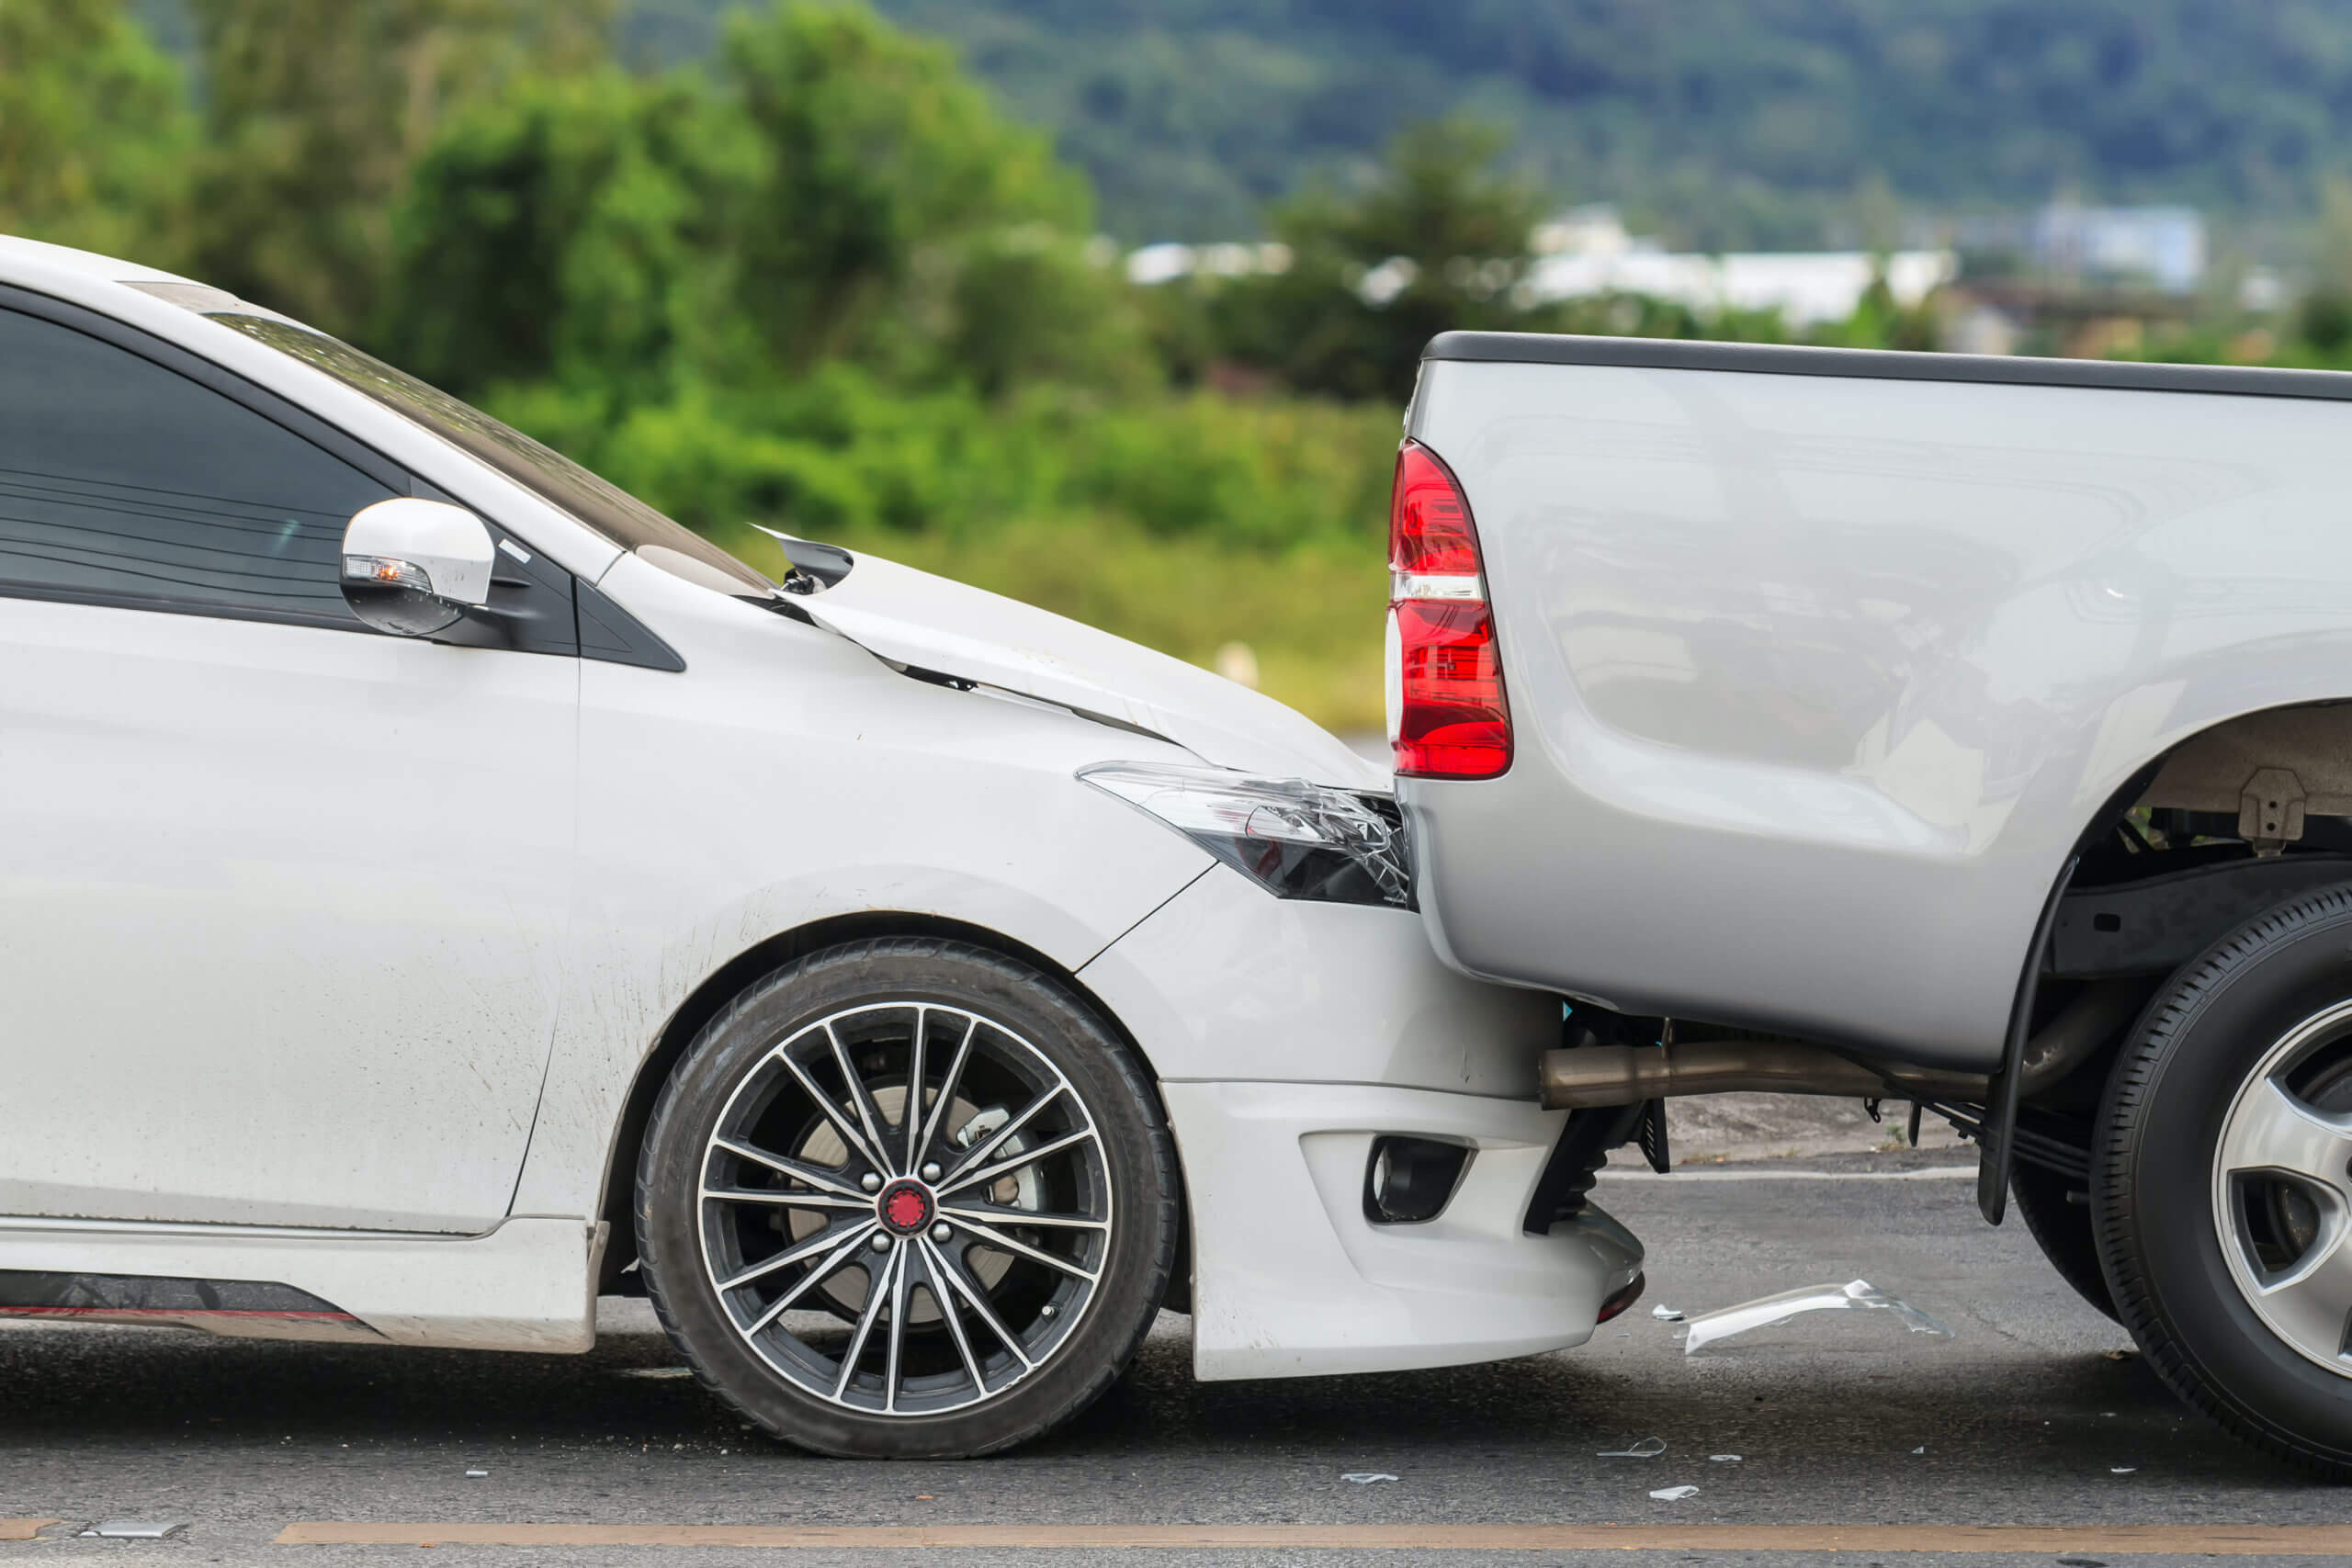 Common Types of Psychological Problems After a Car Accident